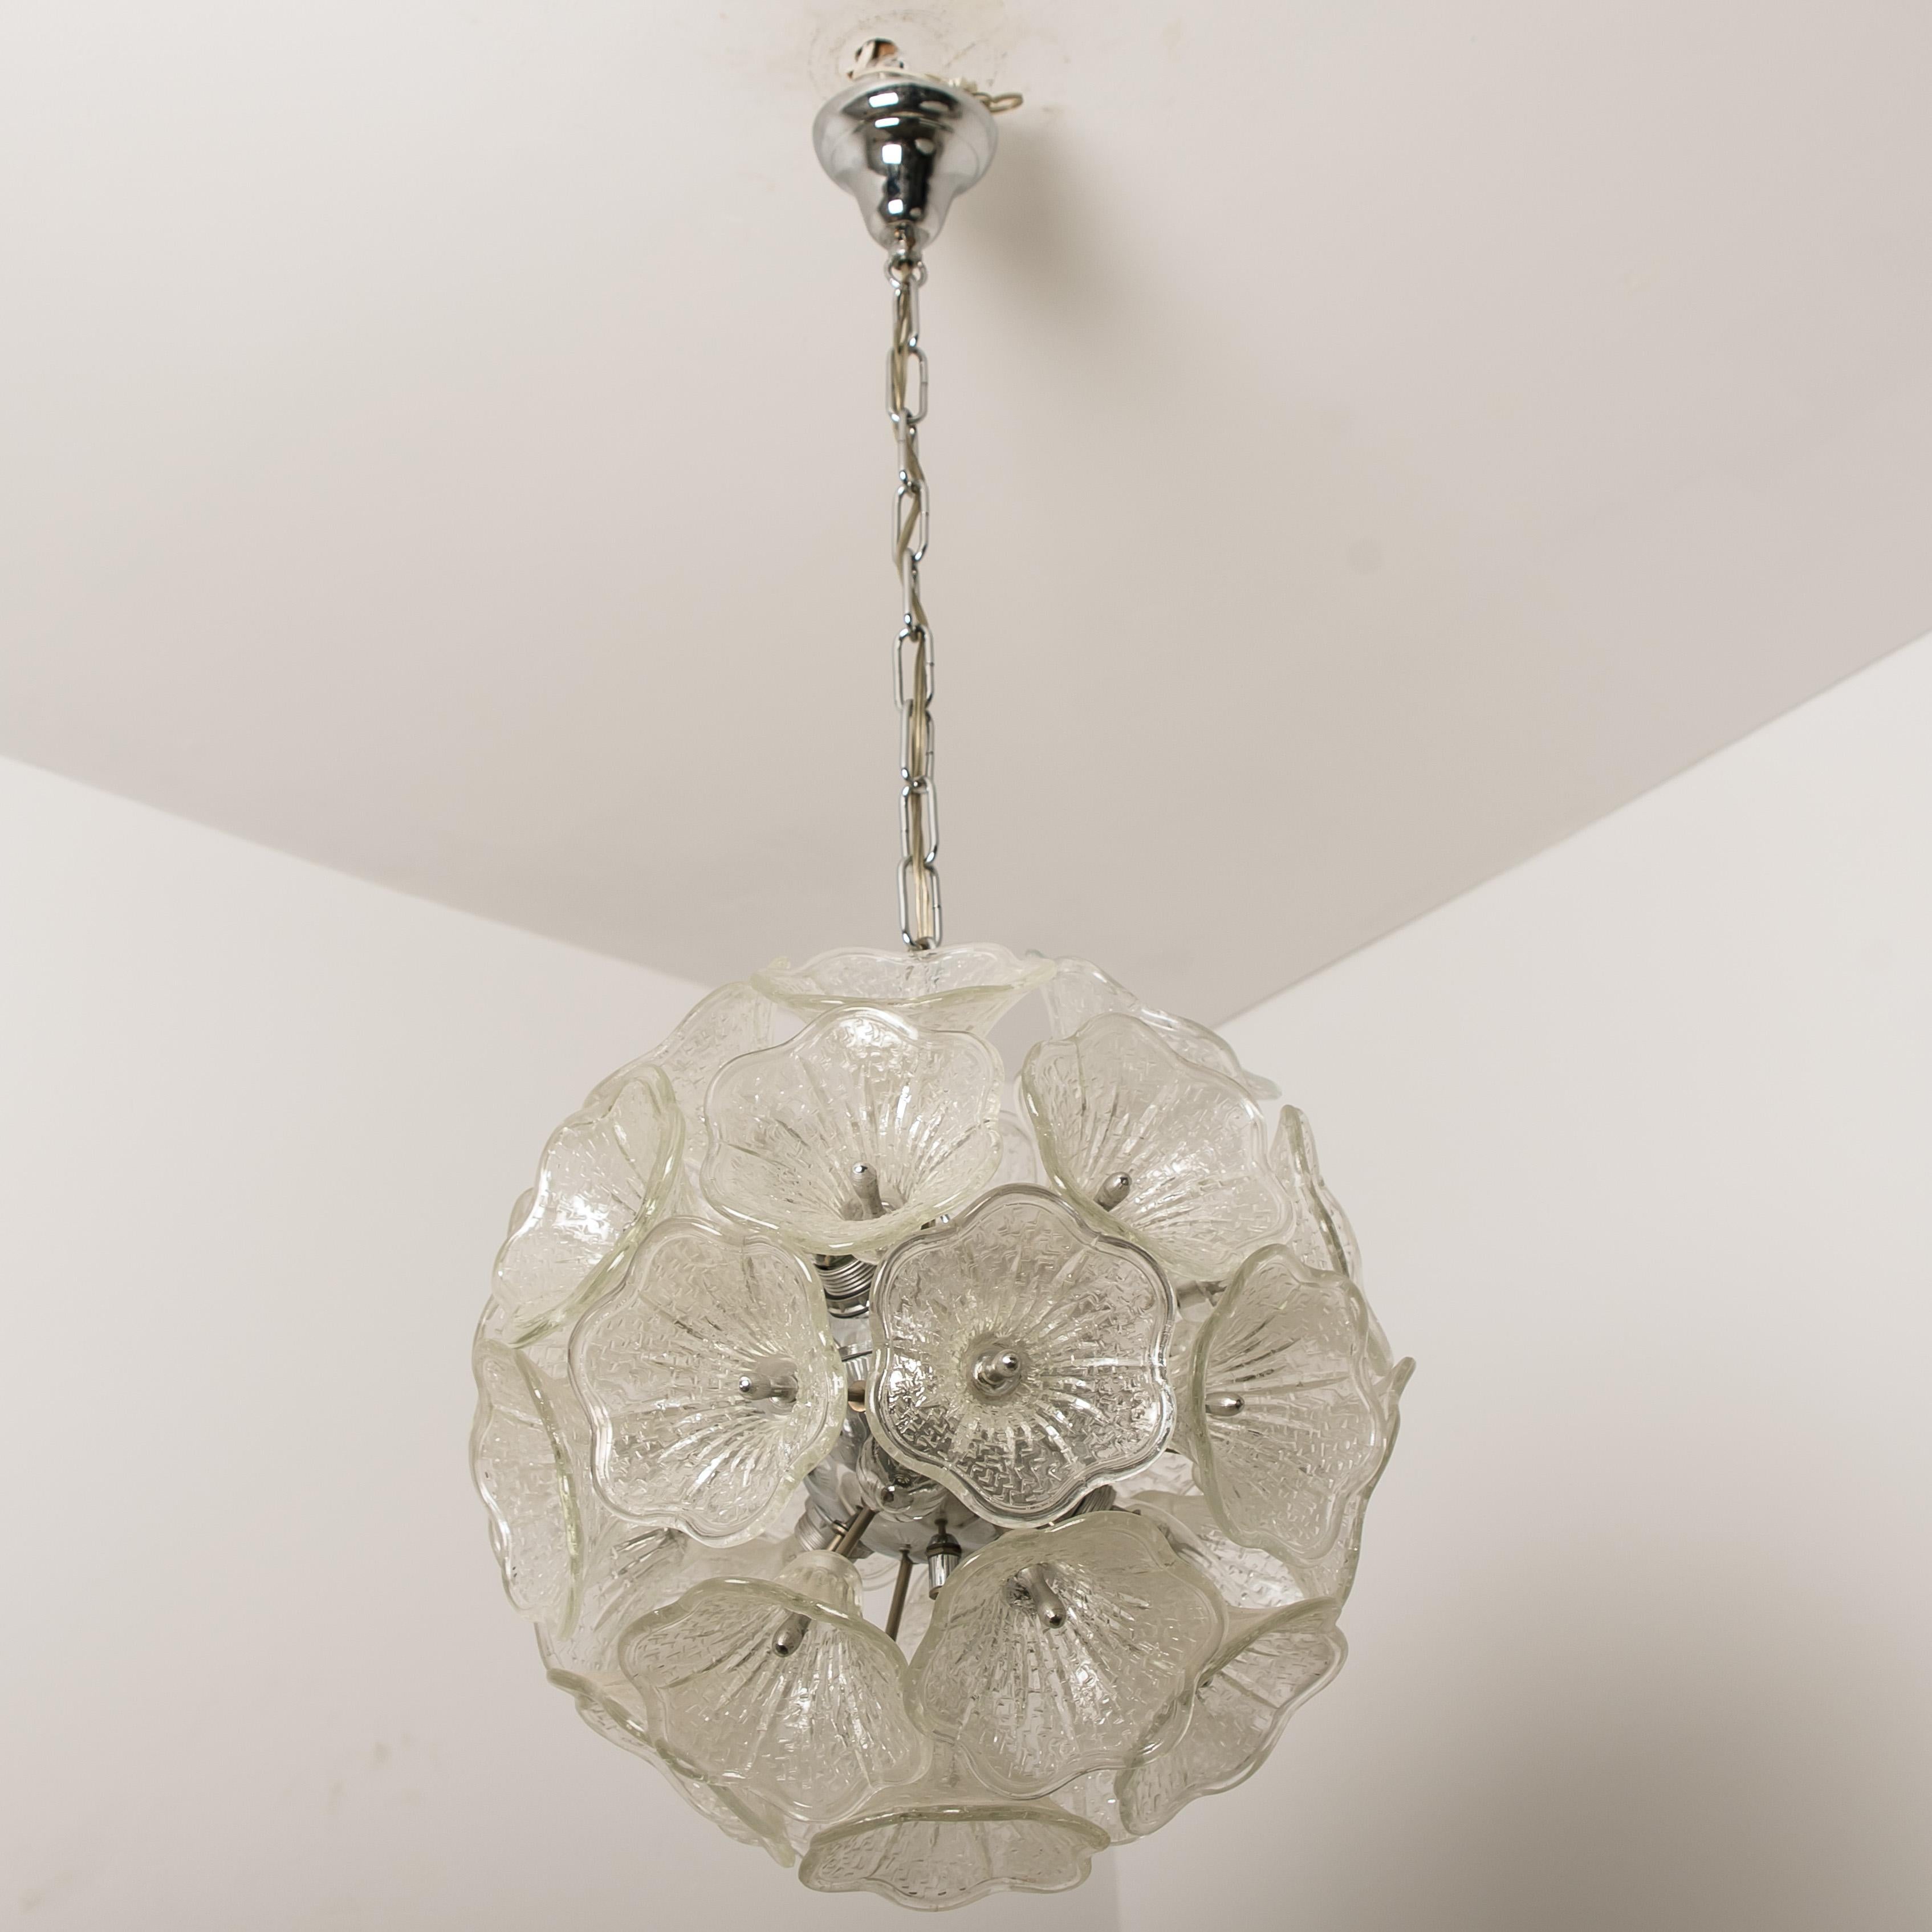 20th Century Sputnik Murano Glass and Chrome Chandelier in the Style of Venini, 1960s For Sale